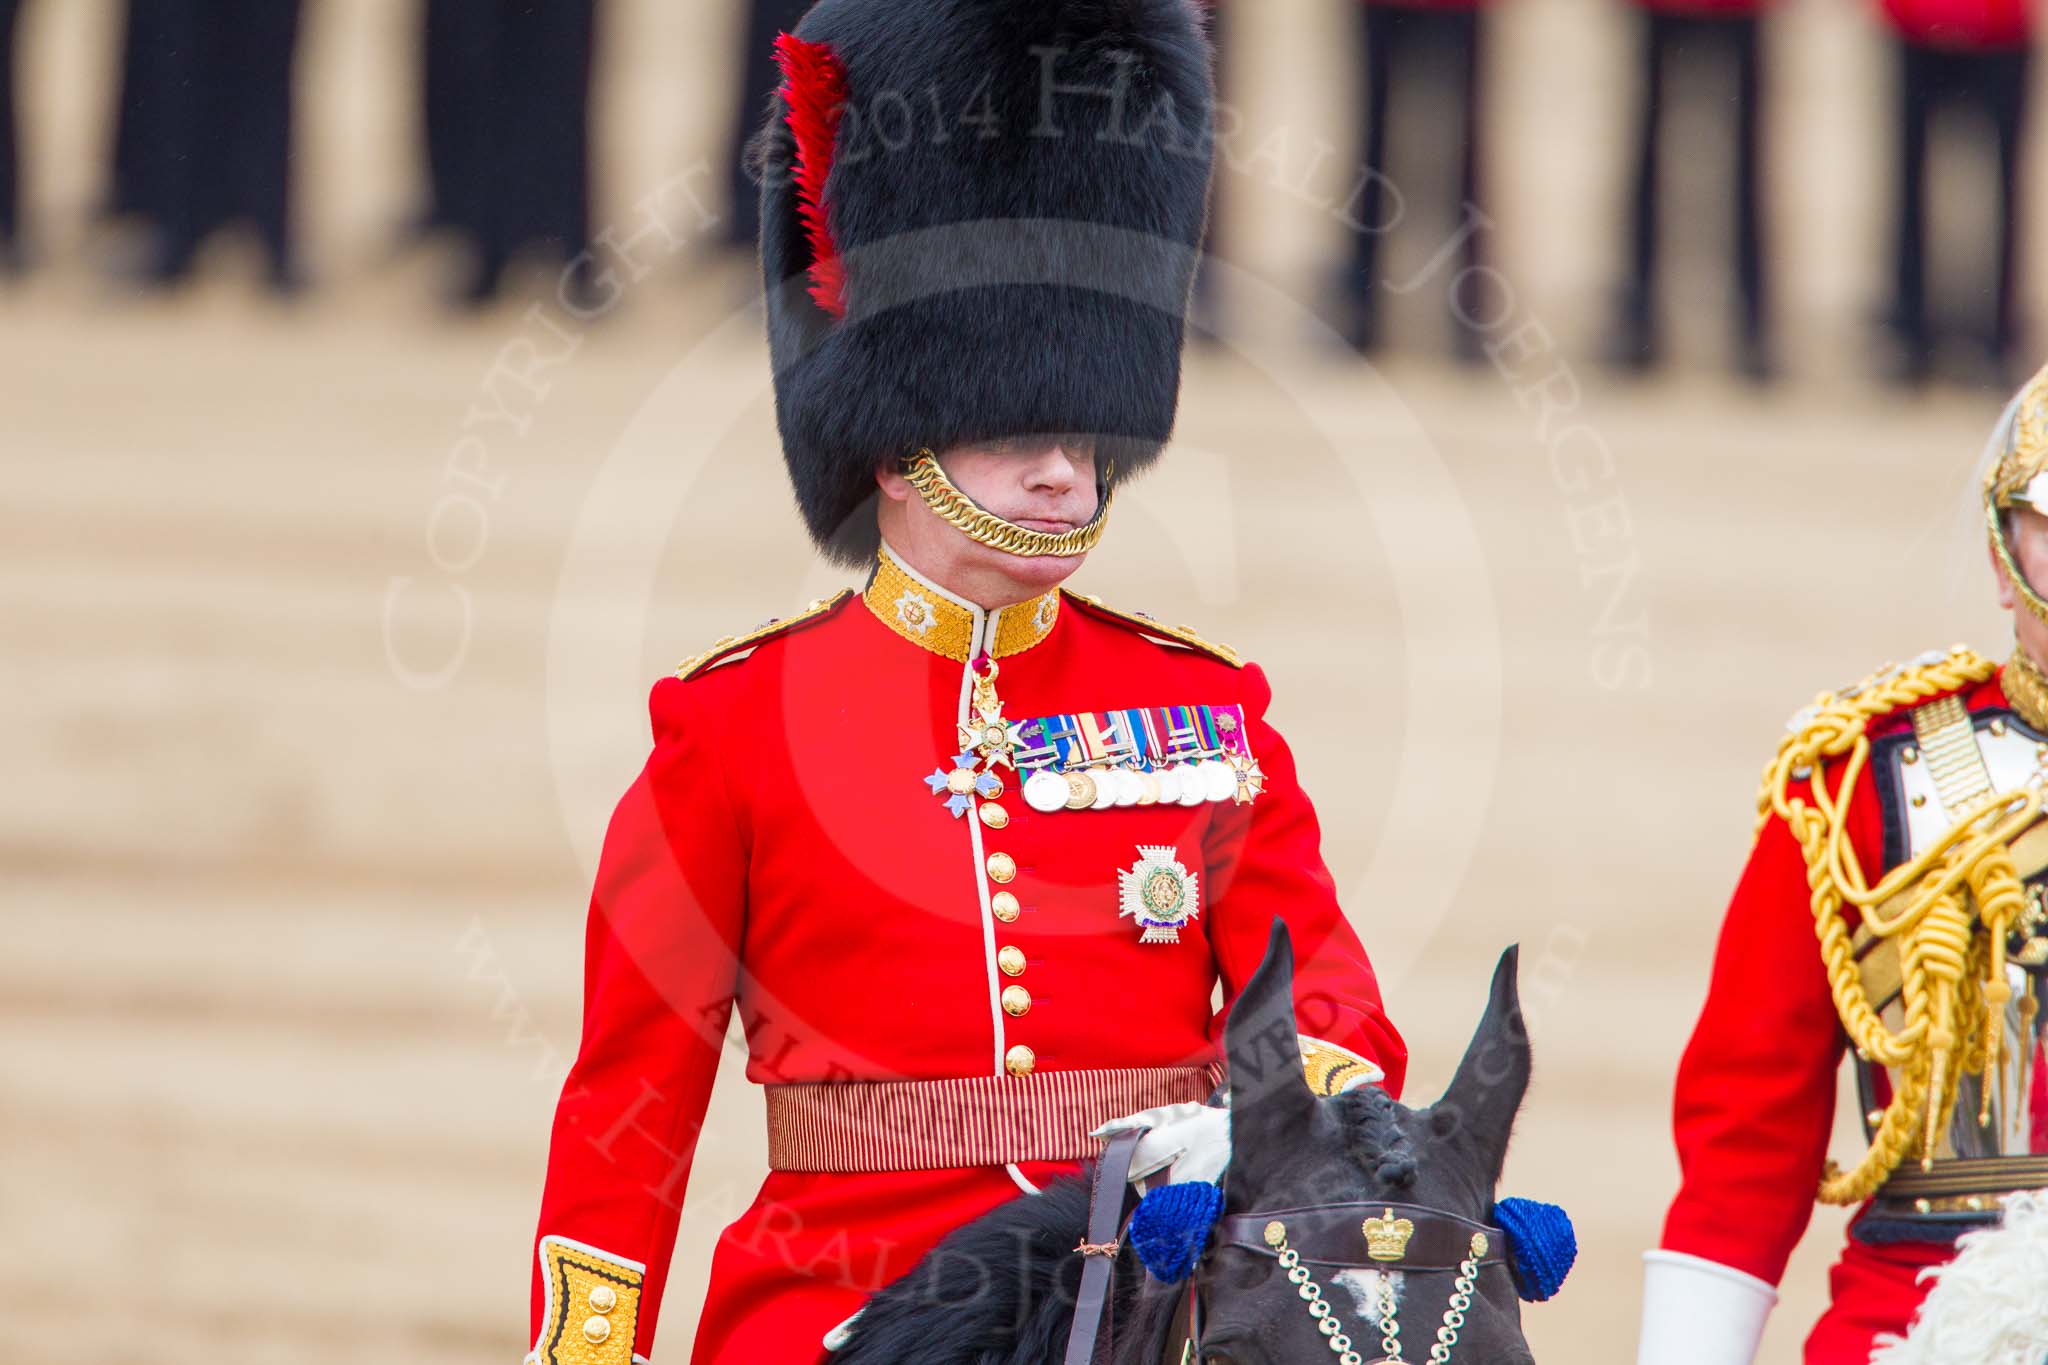 Trooping the Colour 2014.
Horse Guards Parade, Westminster,
London SW1A,

United Kingdom,
on 14 June 2014 at 11:08, image #439